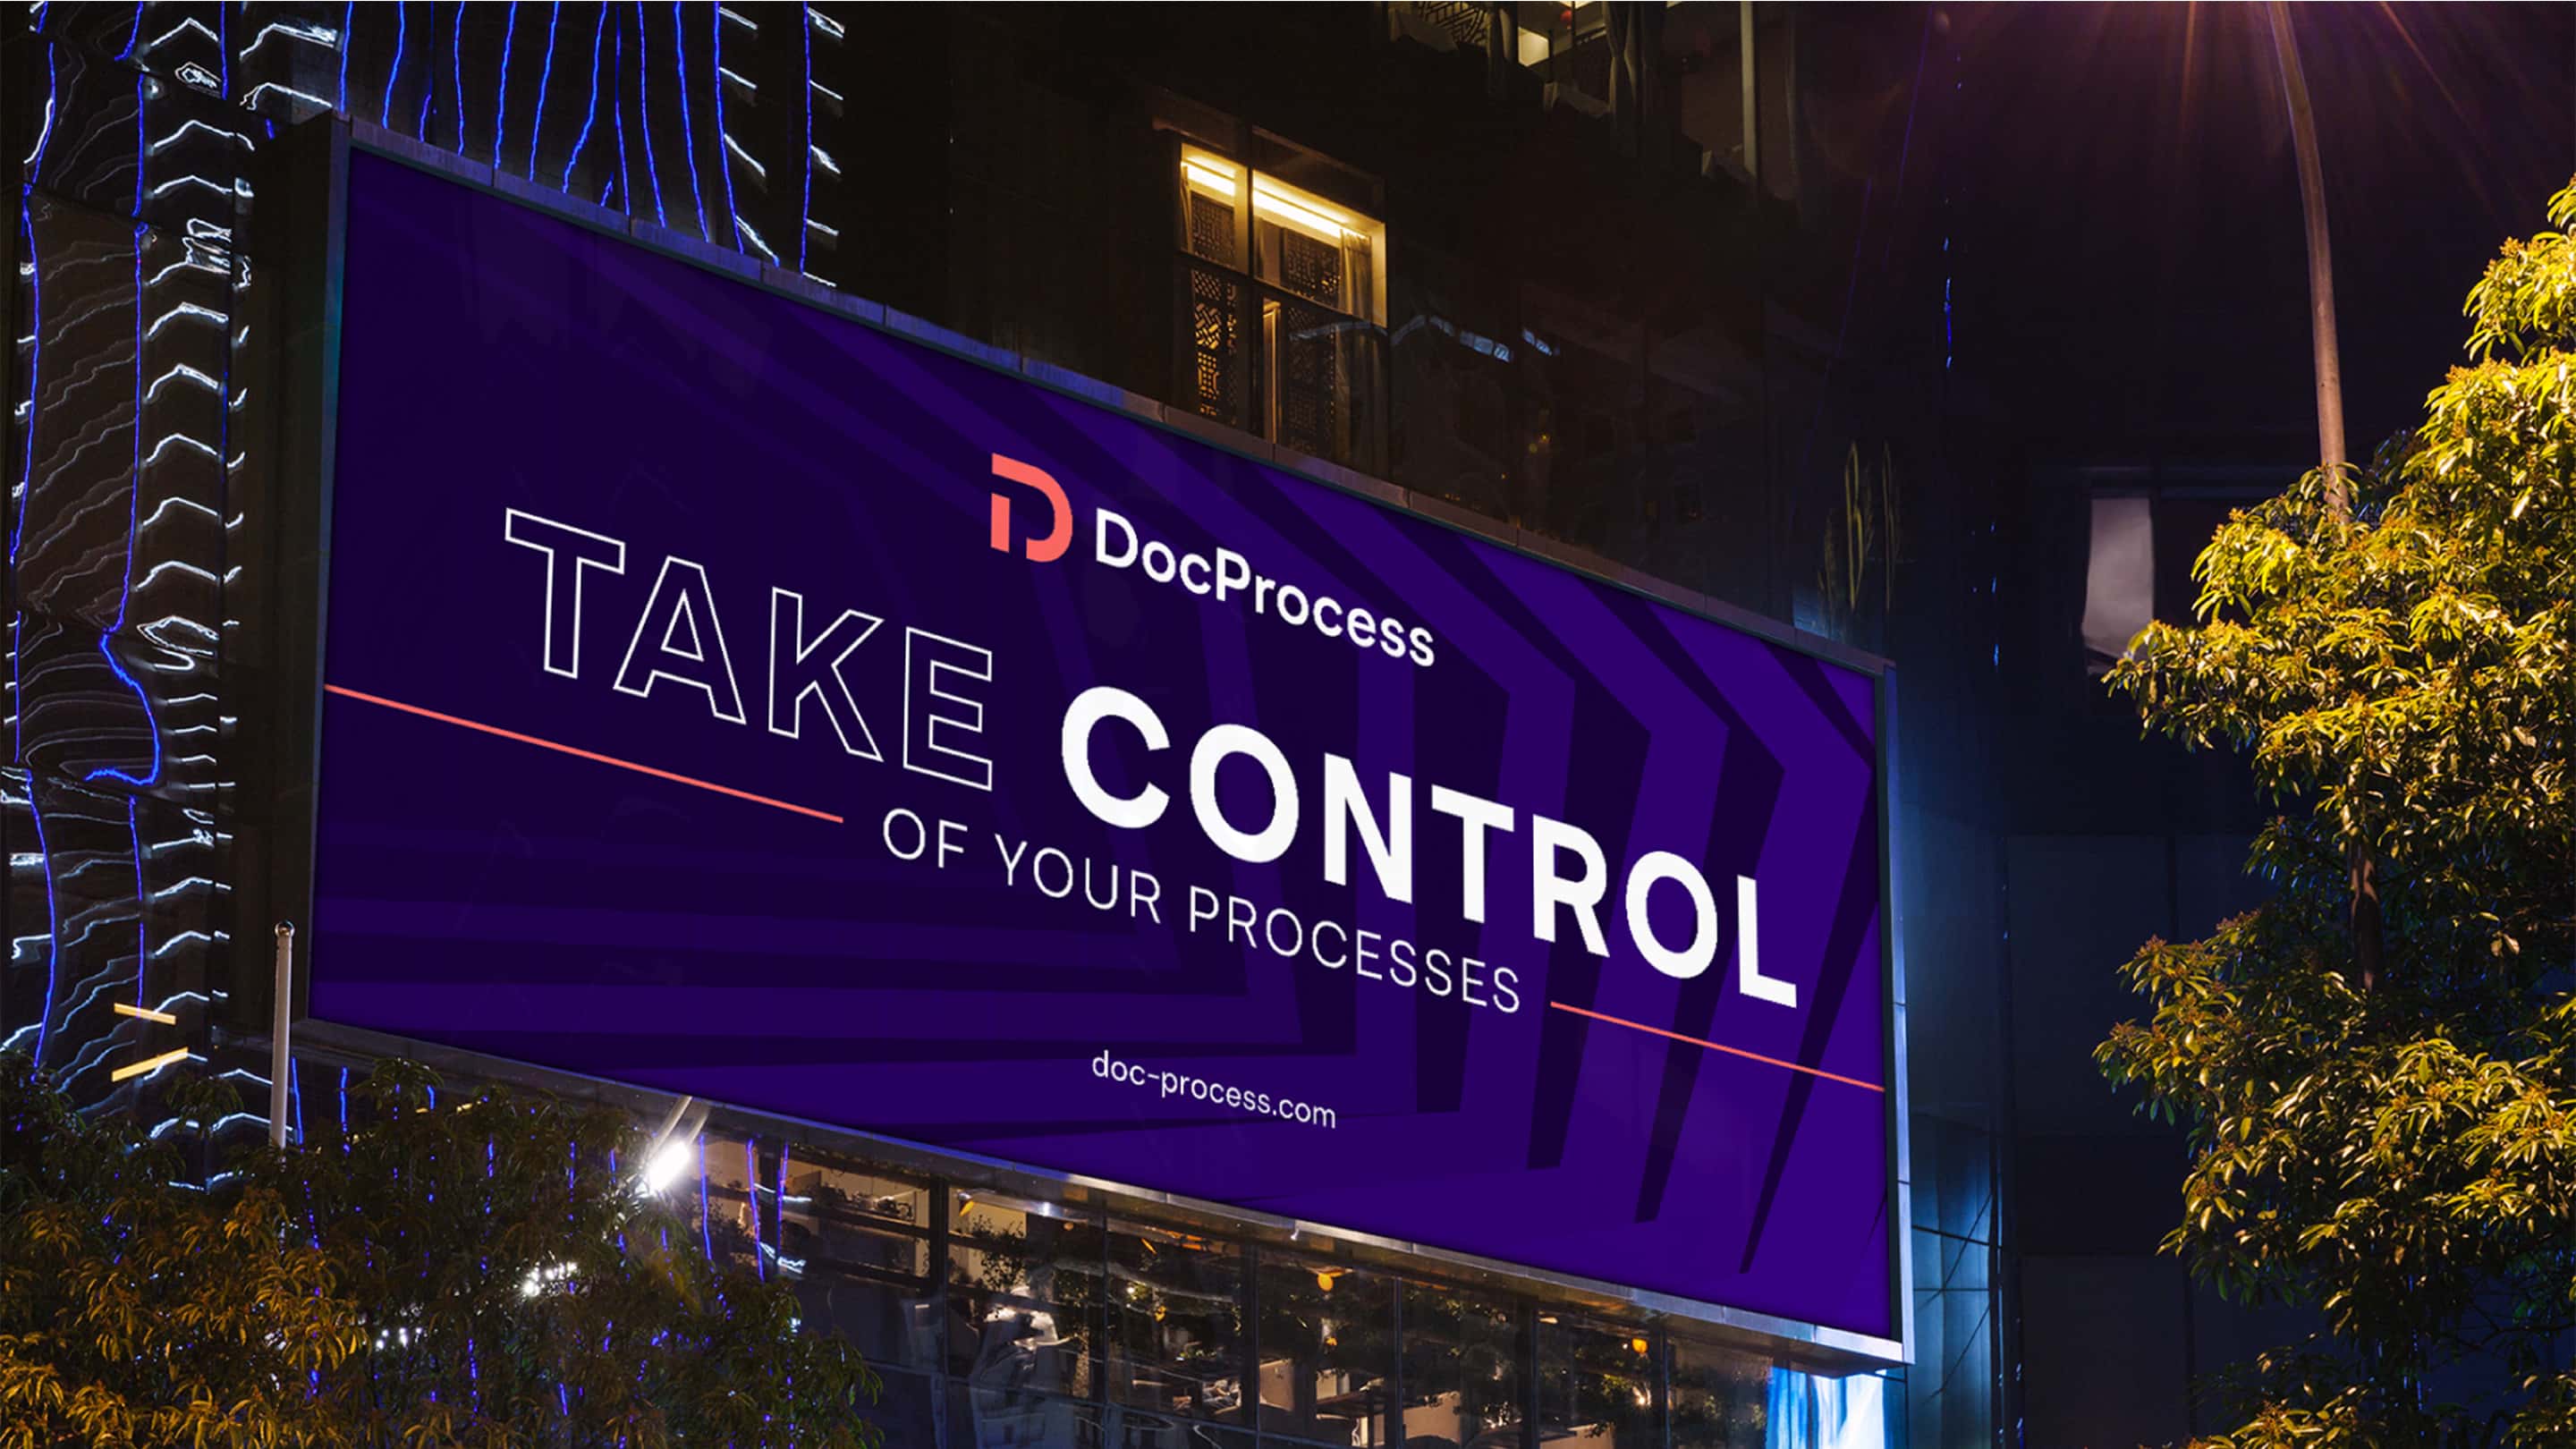 DocProcess out-of-home advertising